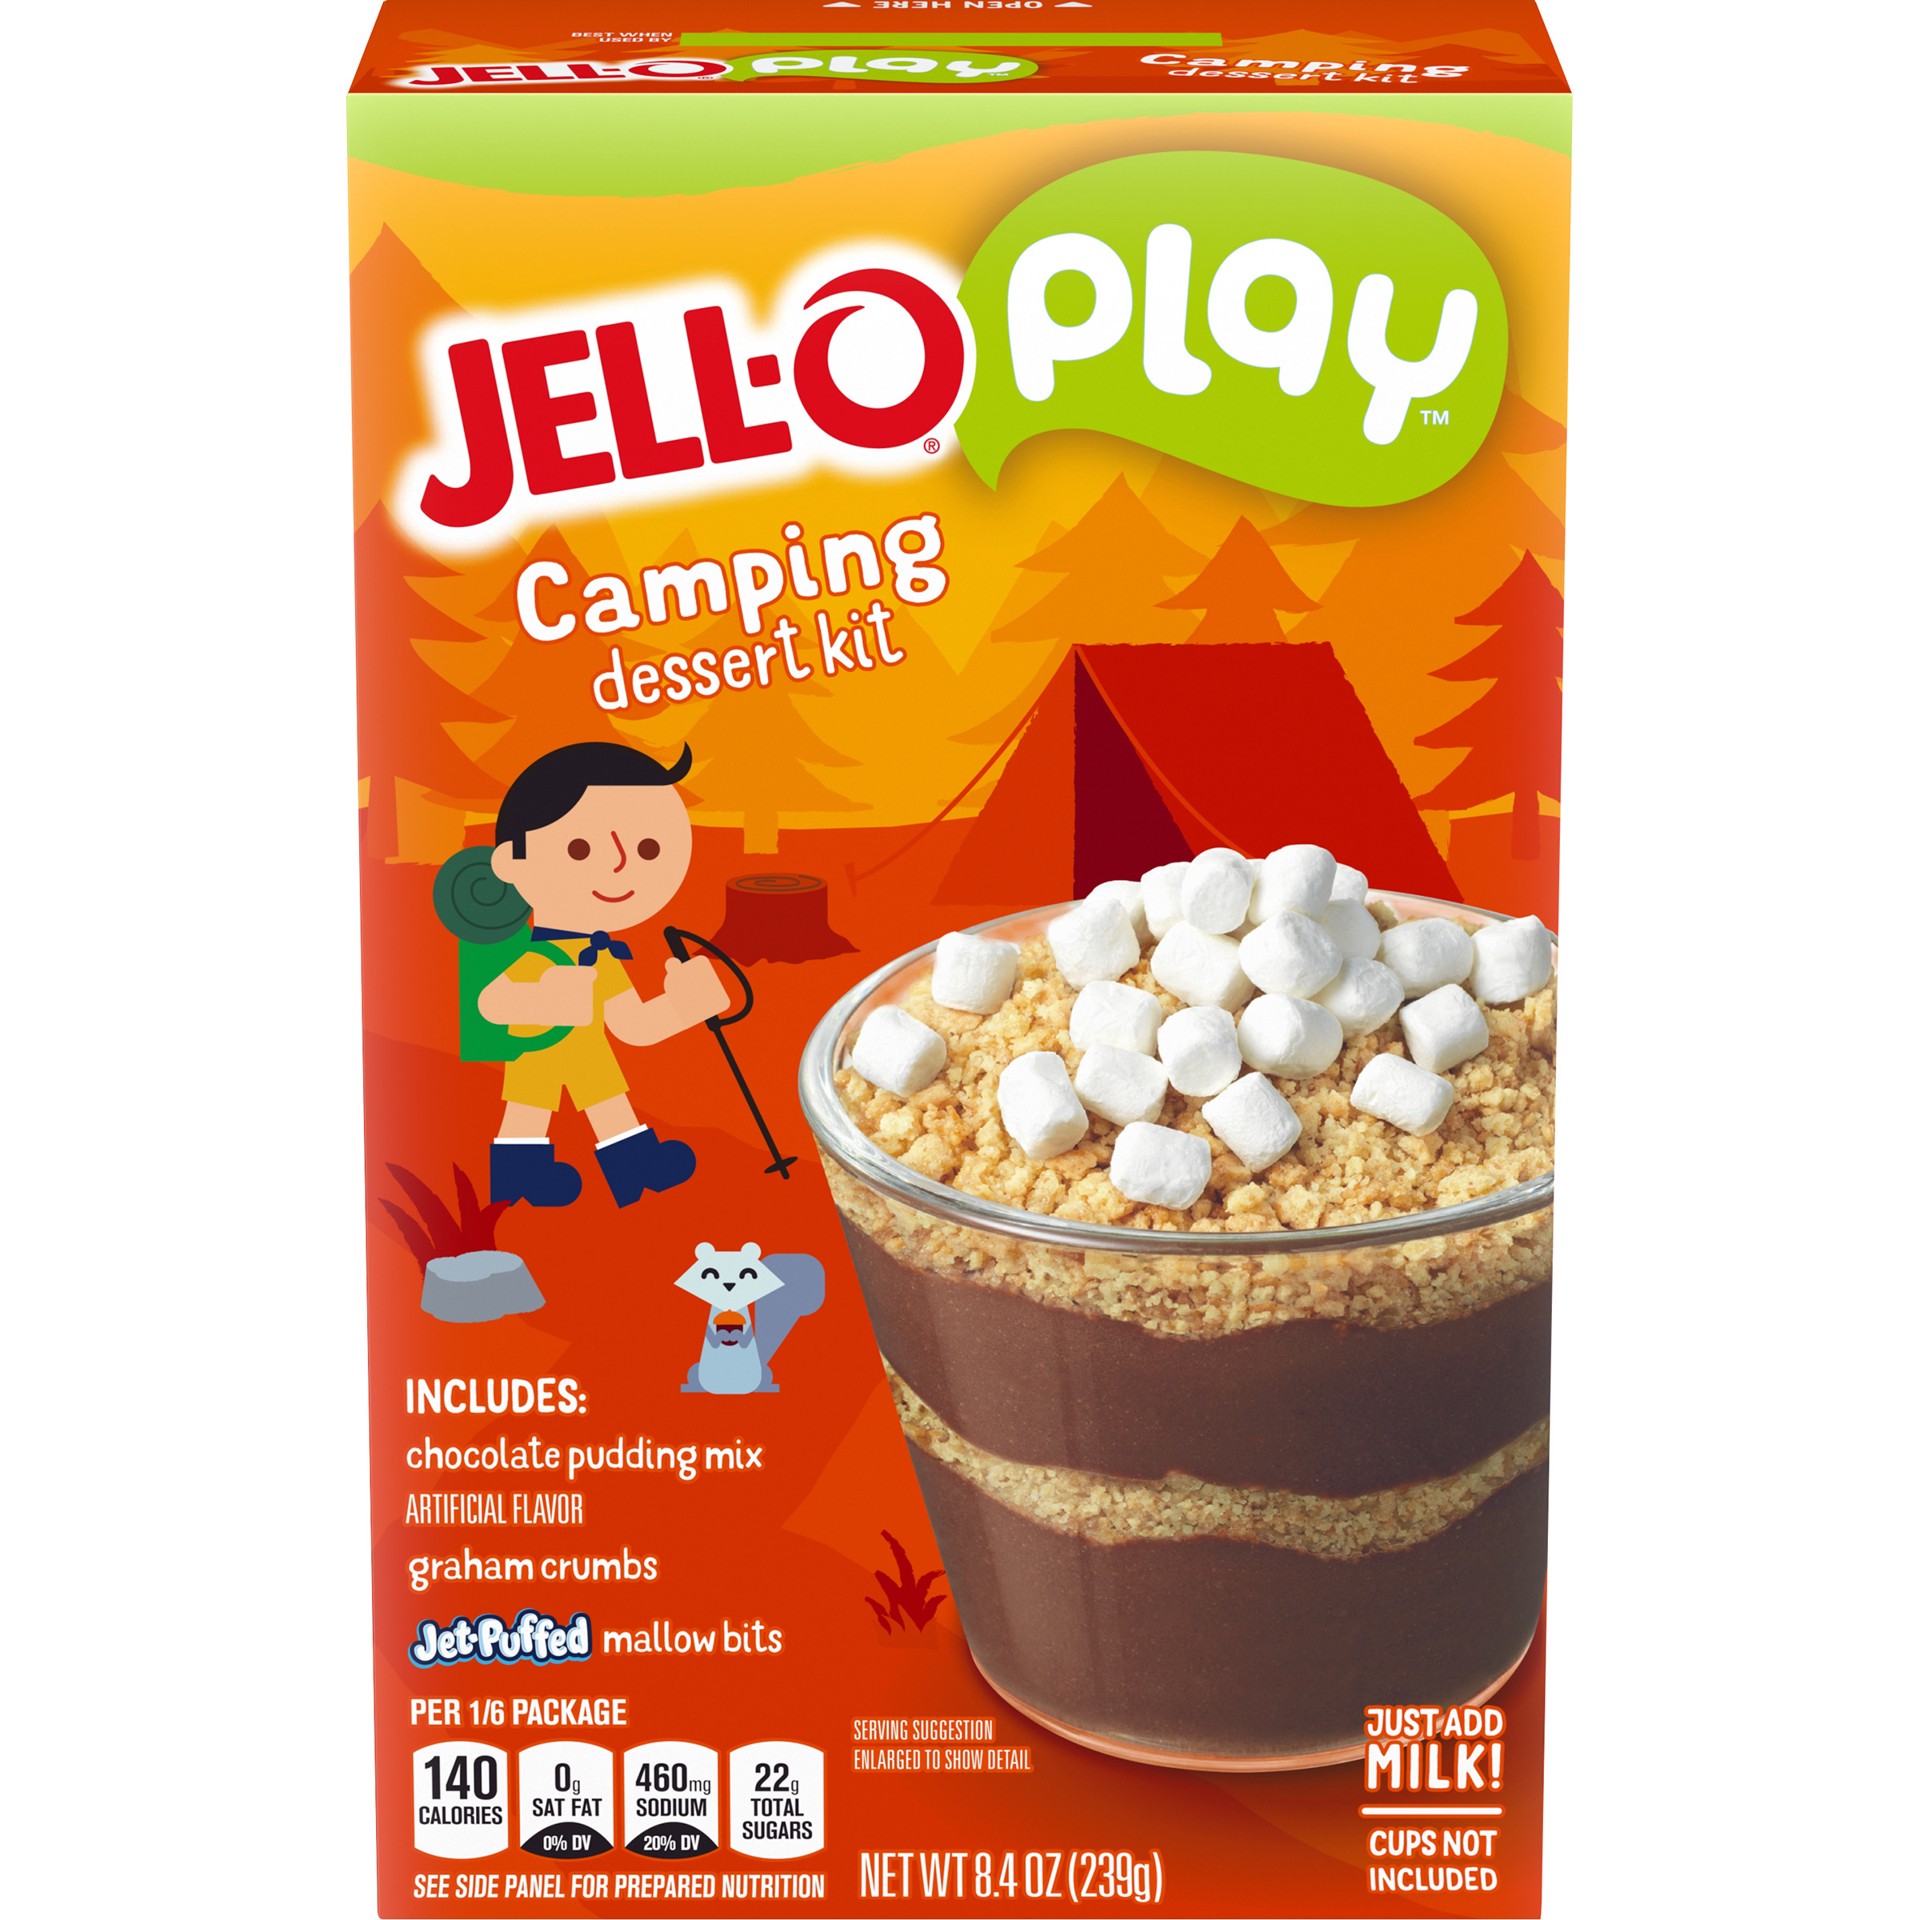 slide 4 of 11, Jell-O Play Camping Dessert Kit with Chocolate Pudding Mix, Graham Crumbs & Jet-Puffed Marshmallow Bits, 8.4 oz Box, 8.4 oz